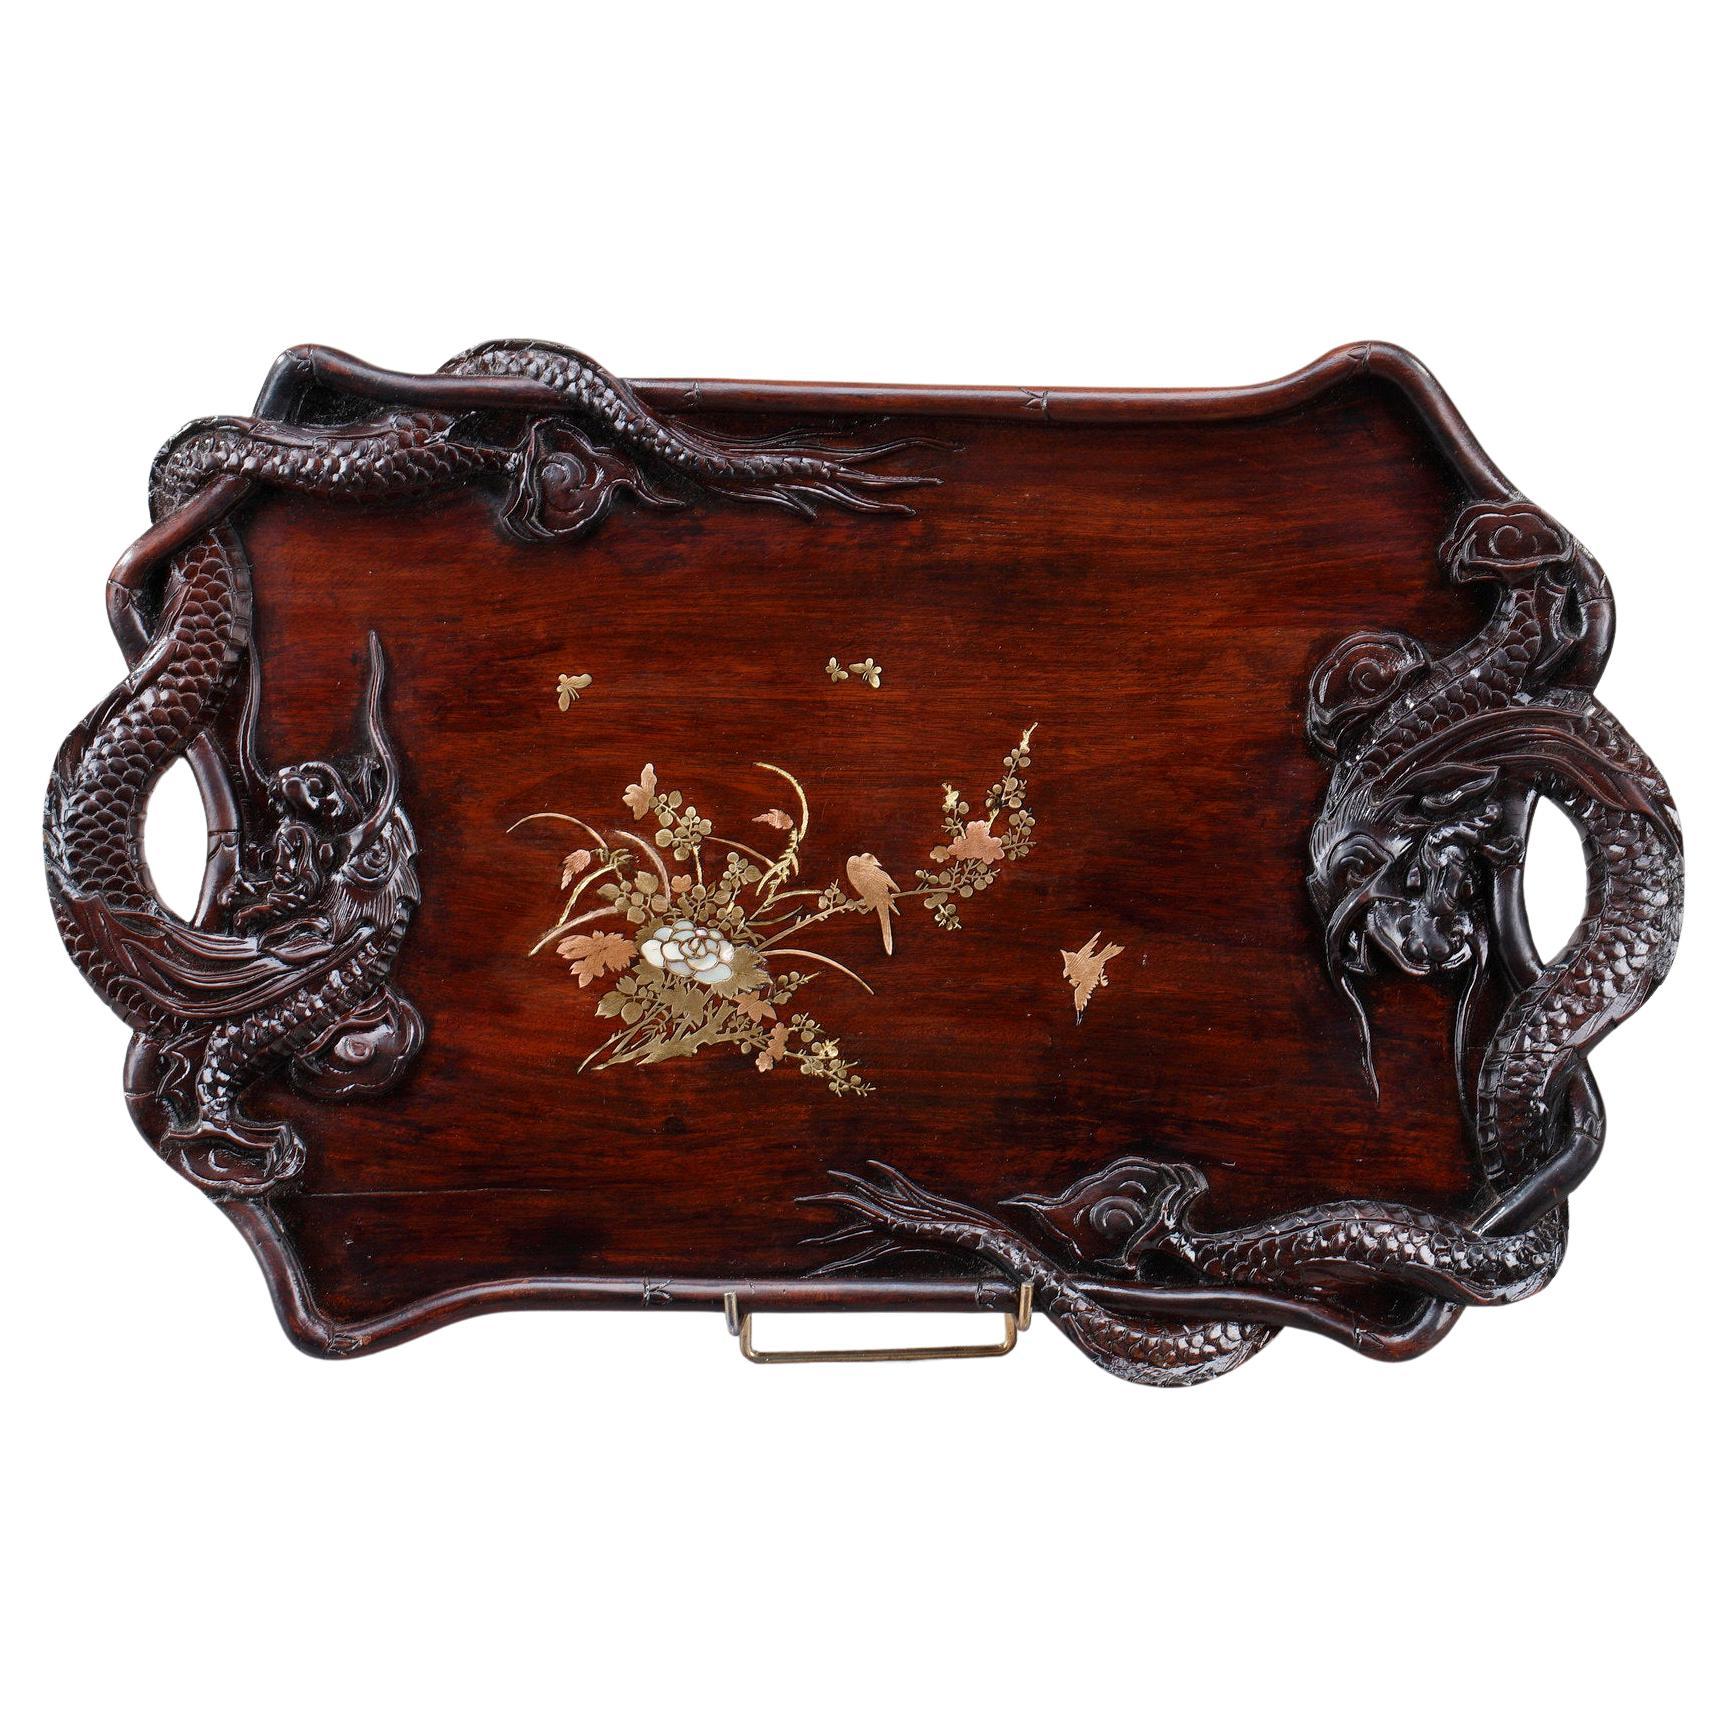 Japanese Lacquered Wood Tray in the Taste of Gabriel Viardot